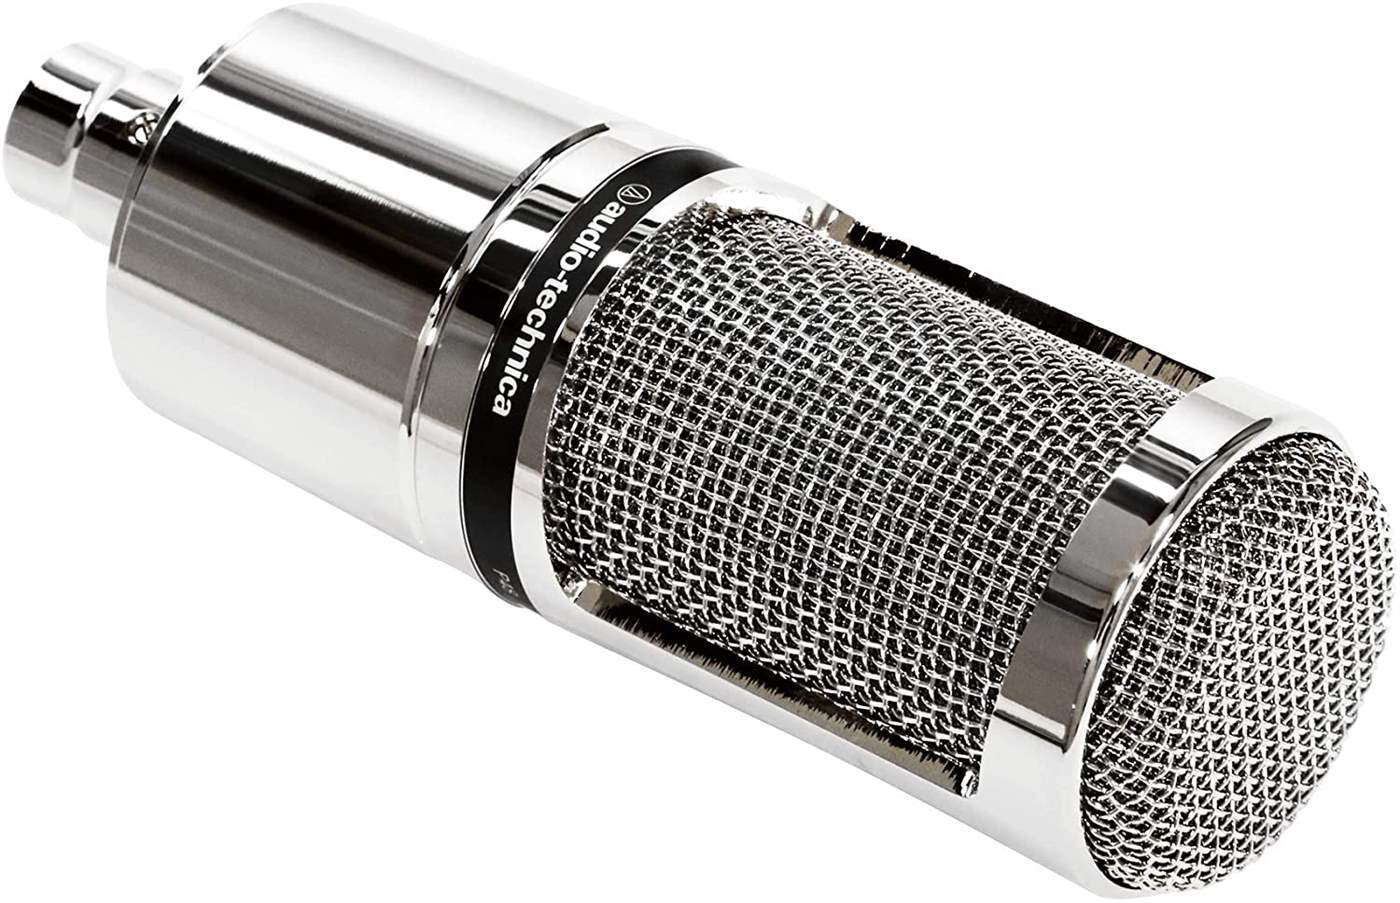 AUDIO-TECHNICA AT2020V Condenser Microphone | Kytary.ie